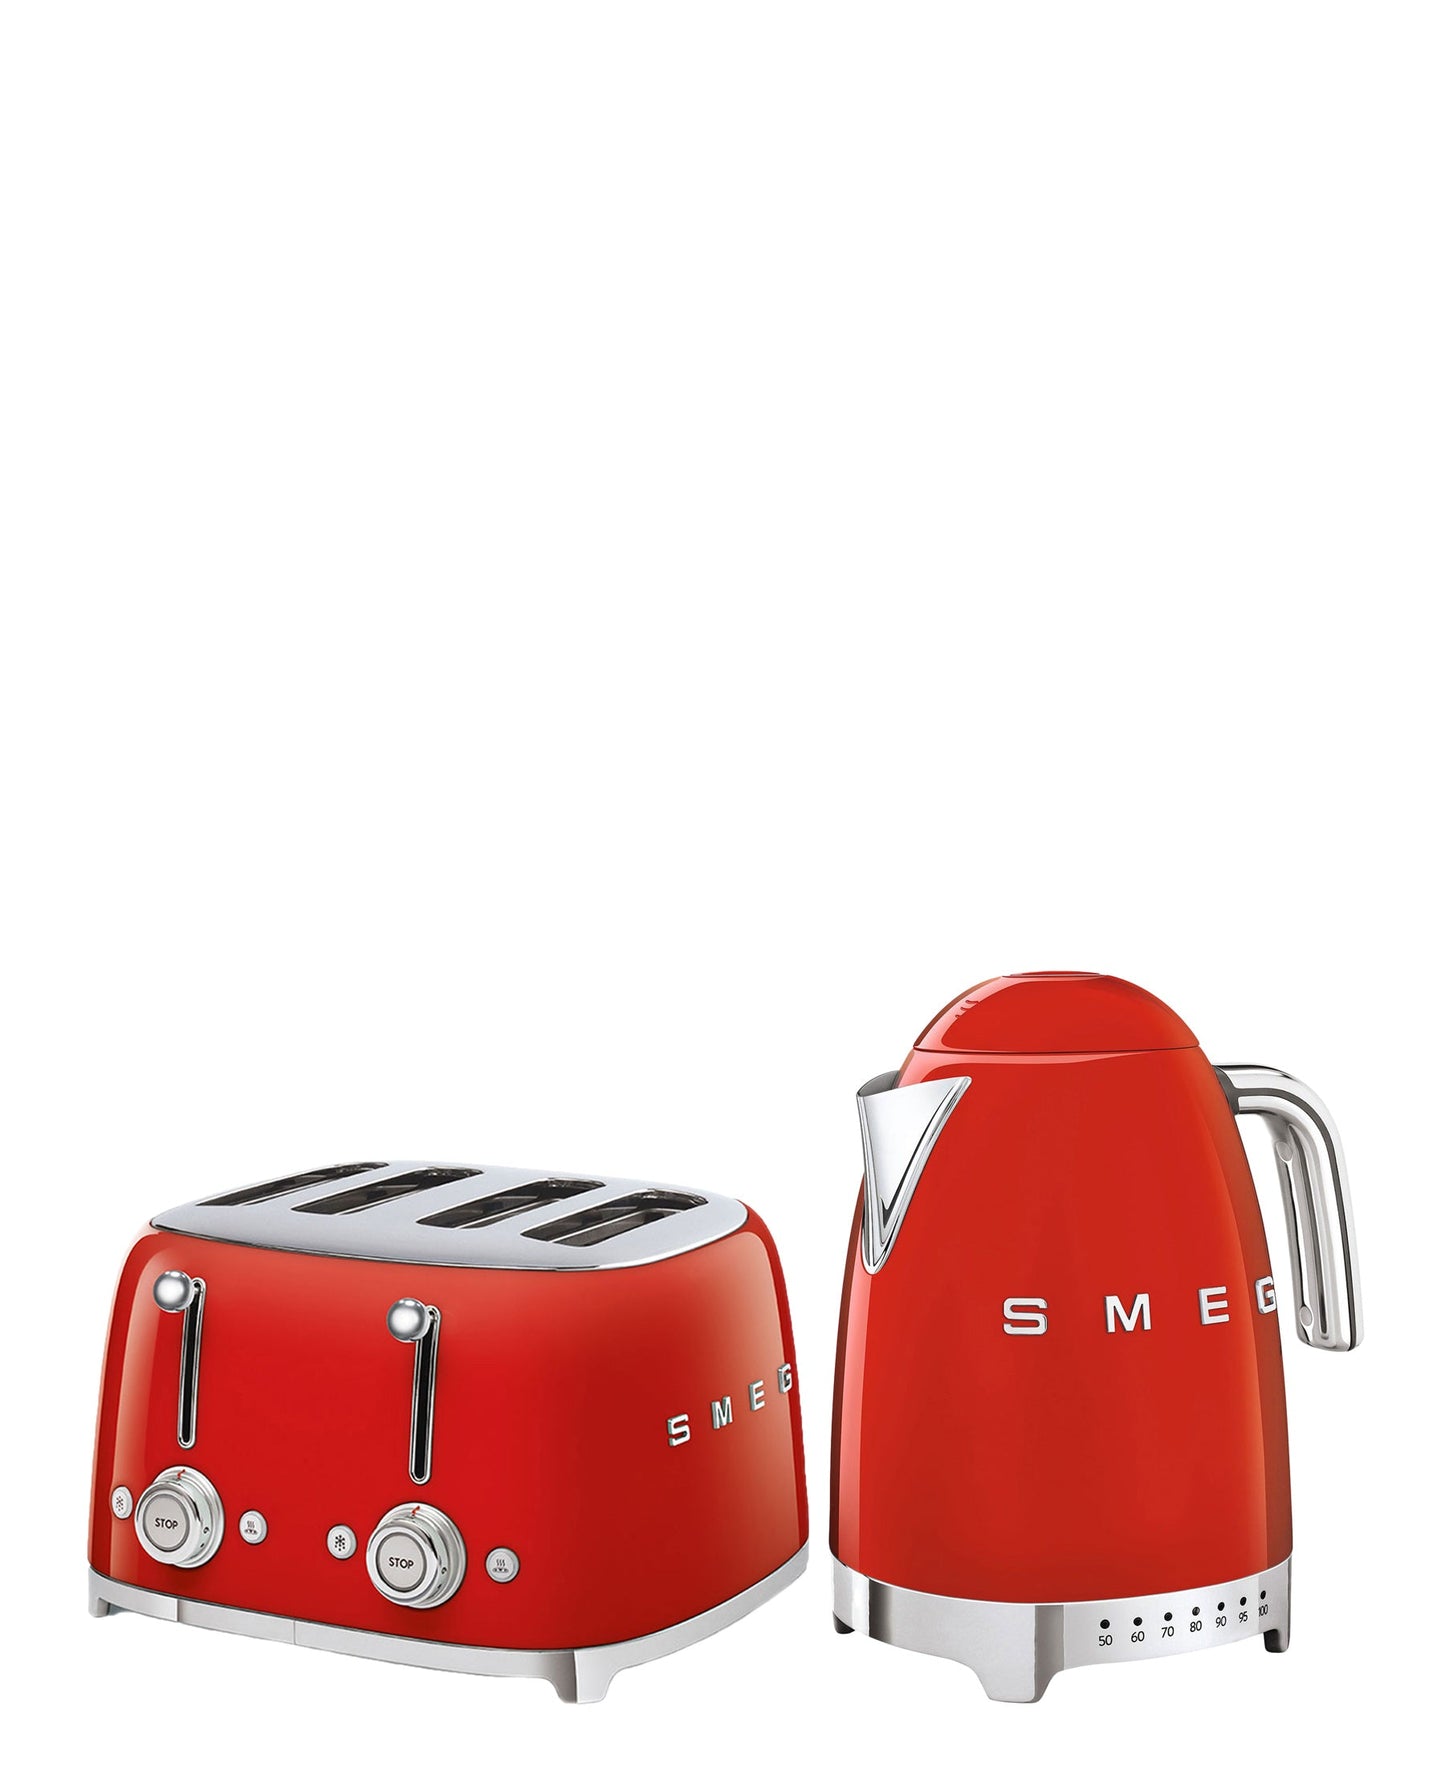 Smeg Retro 4 Slice Square Toaster & Variable Kettle Combo - Red